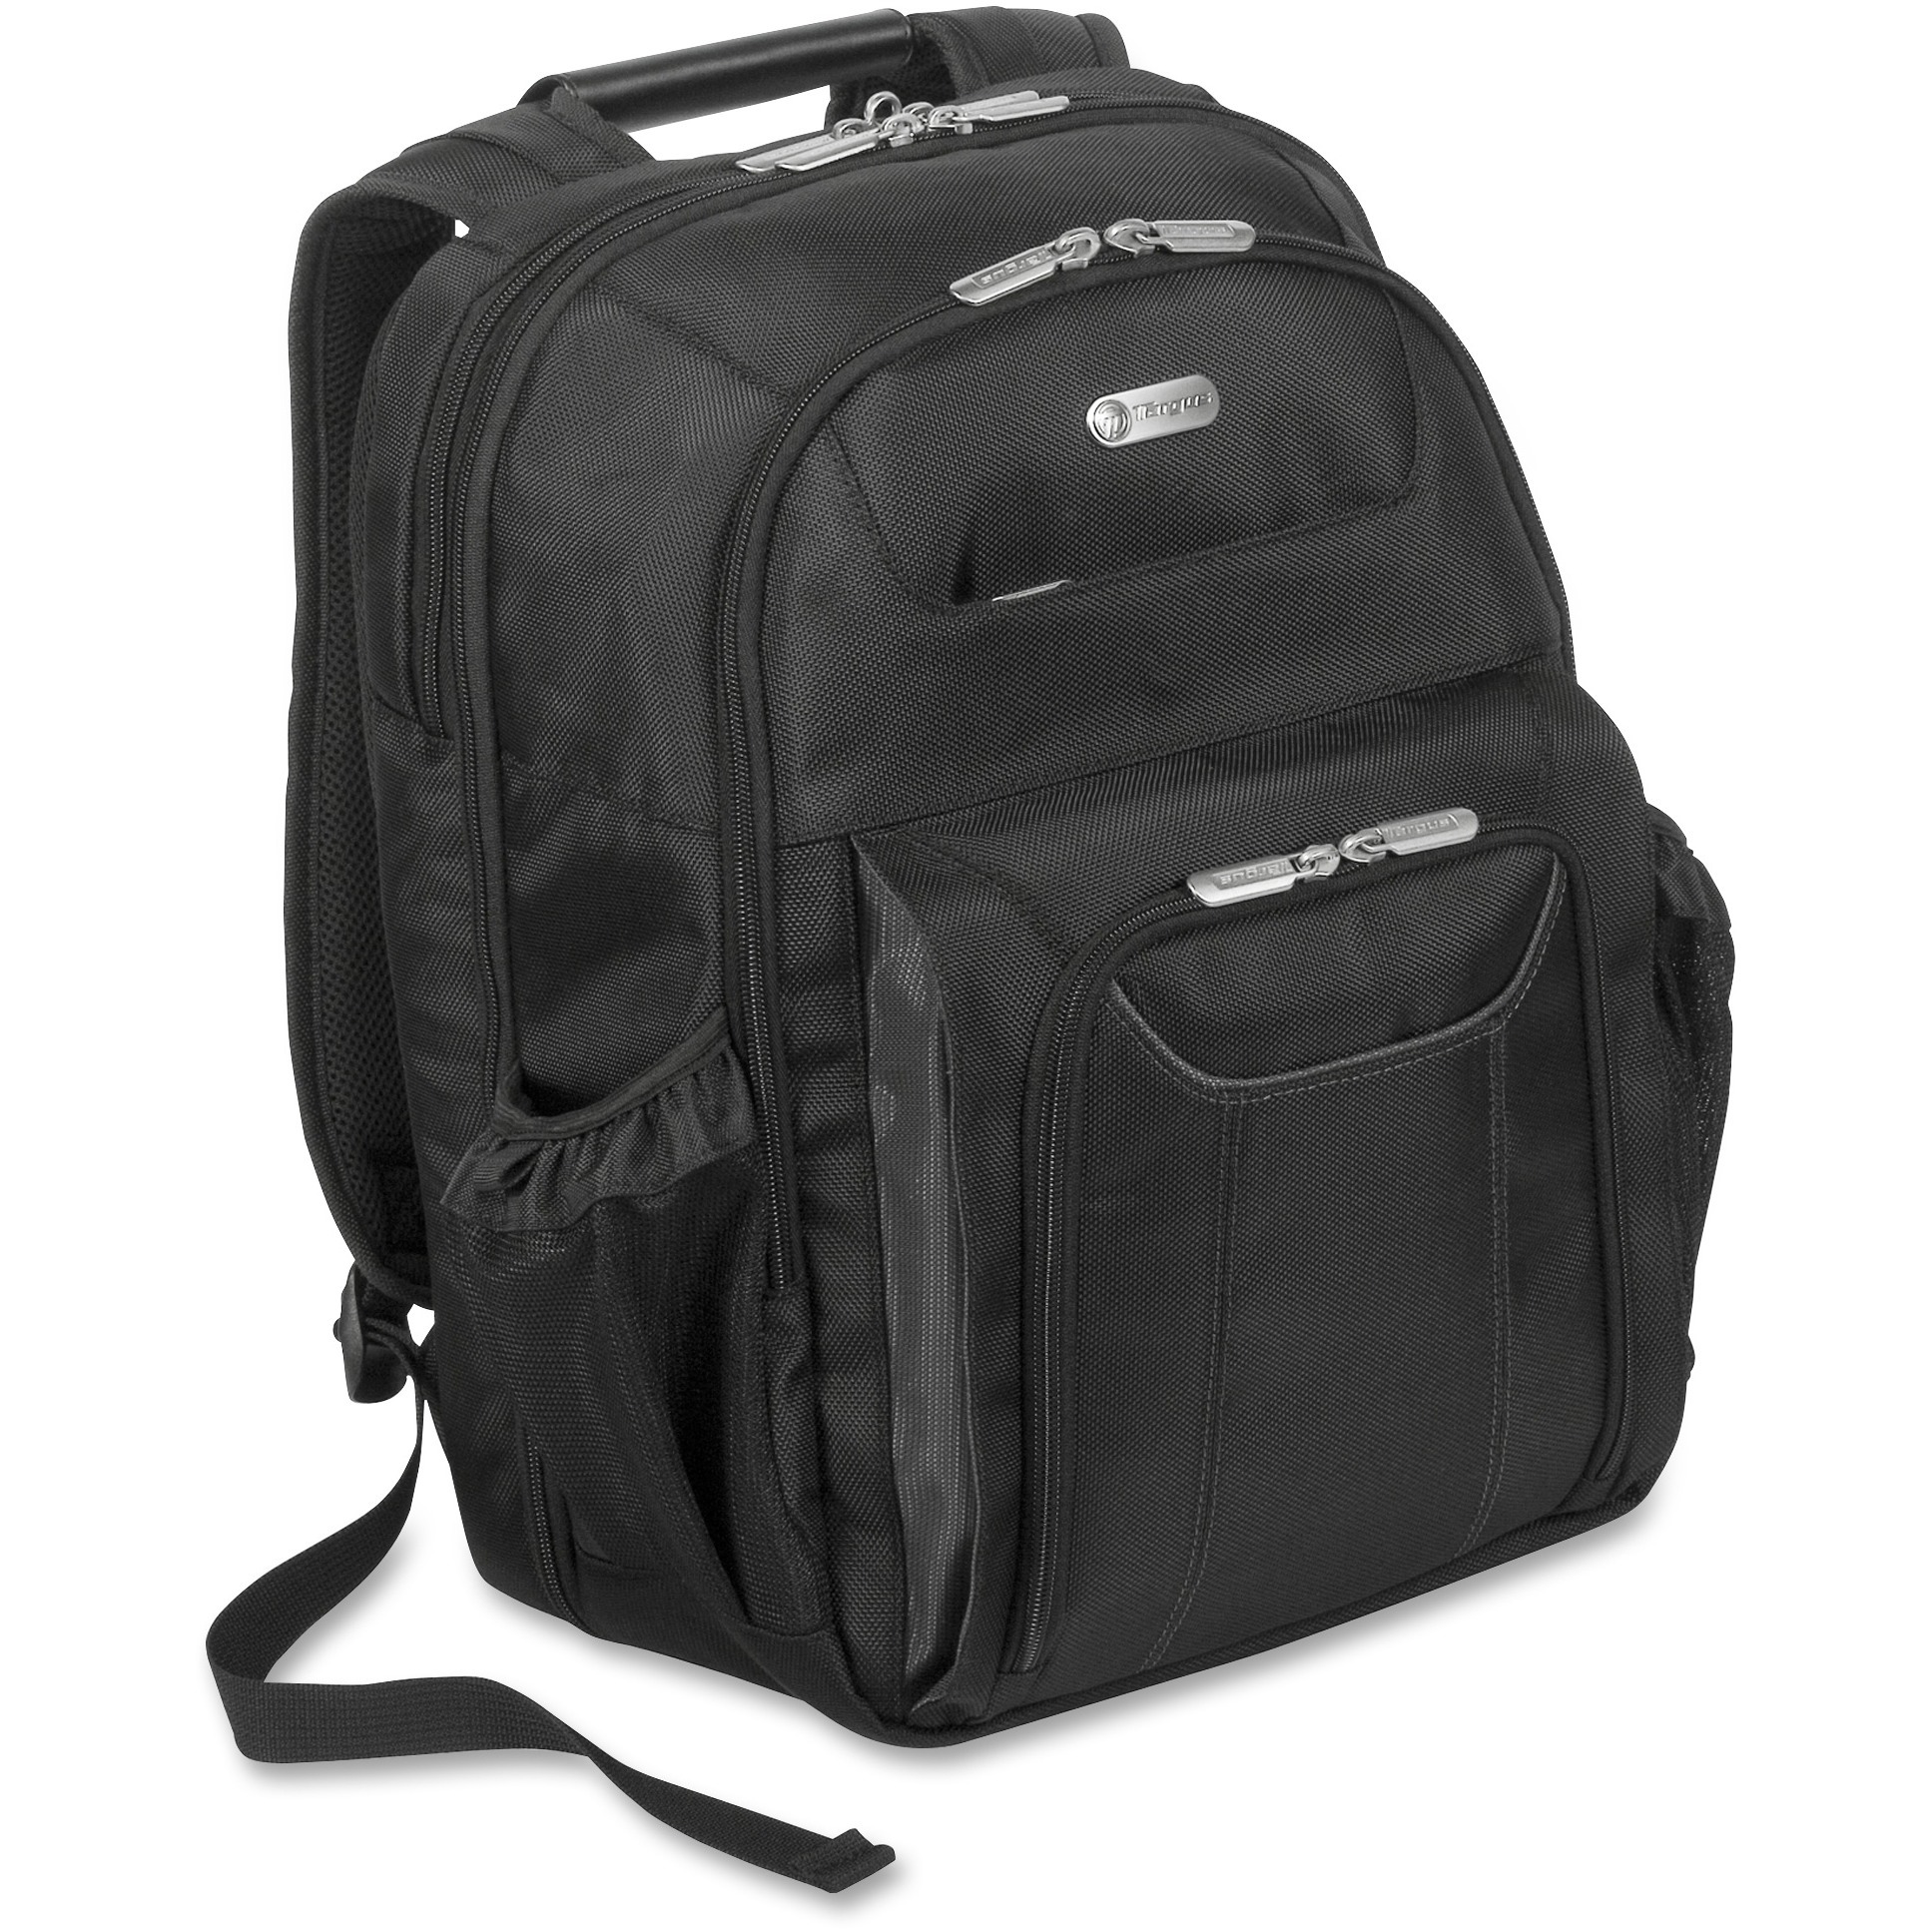 Targus 16 inch Air Traveler Checkpoint-Friendly Backpack, Black - TBB012US - image 1 of 2